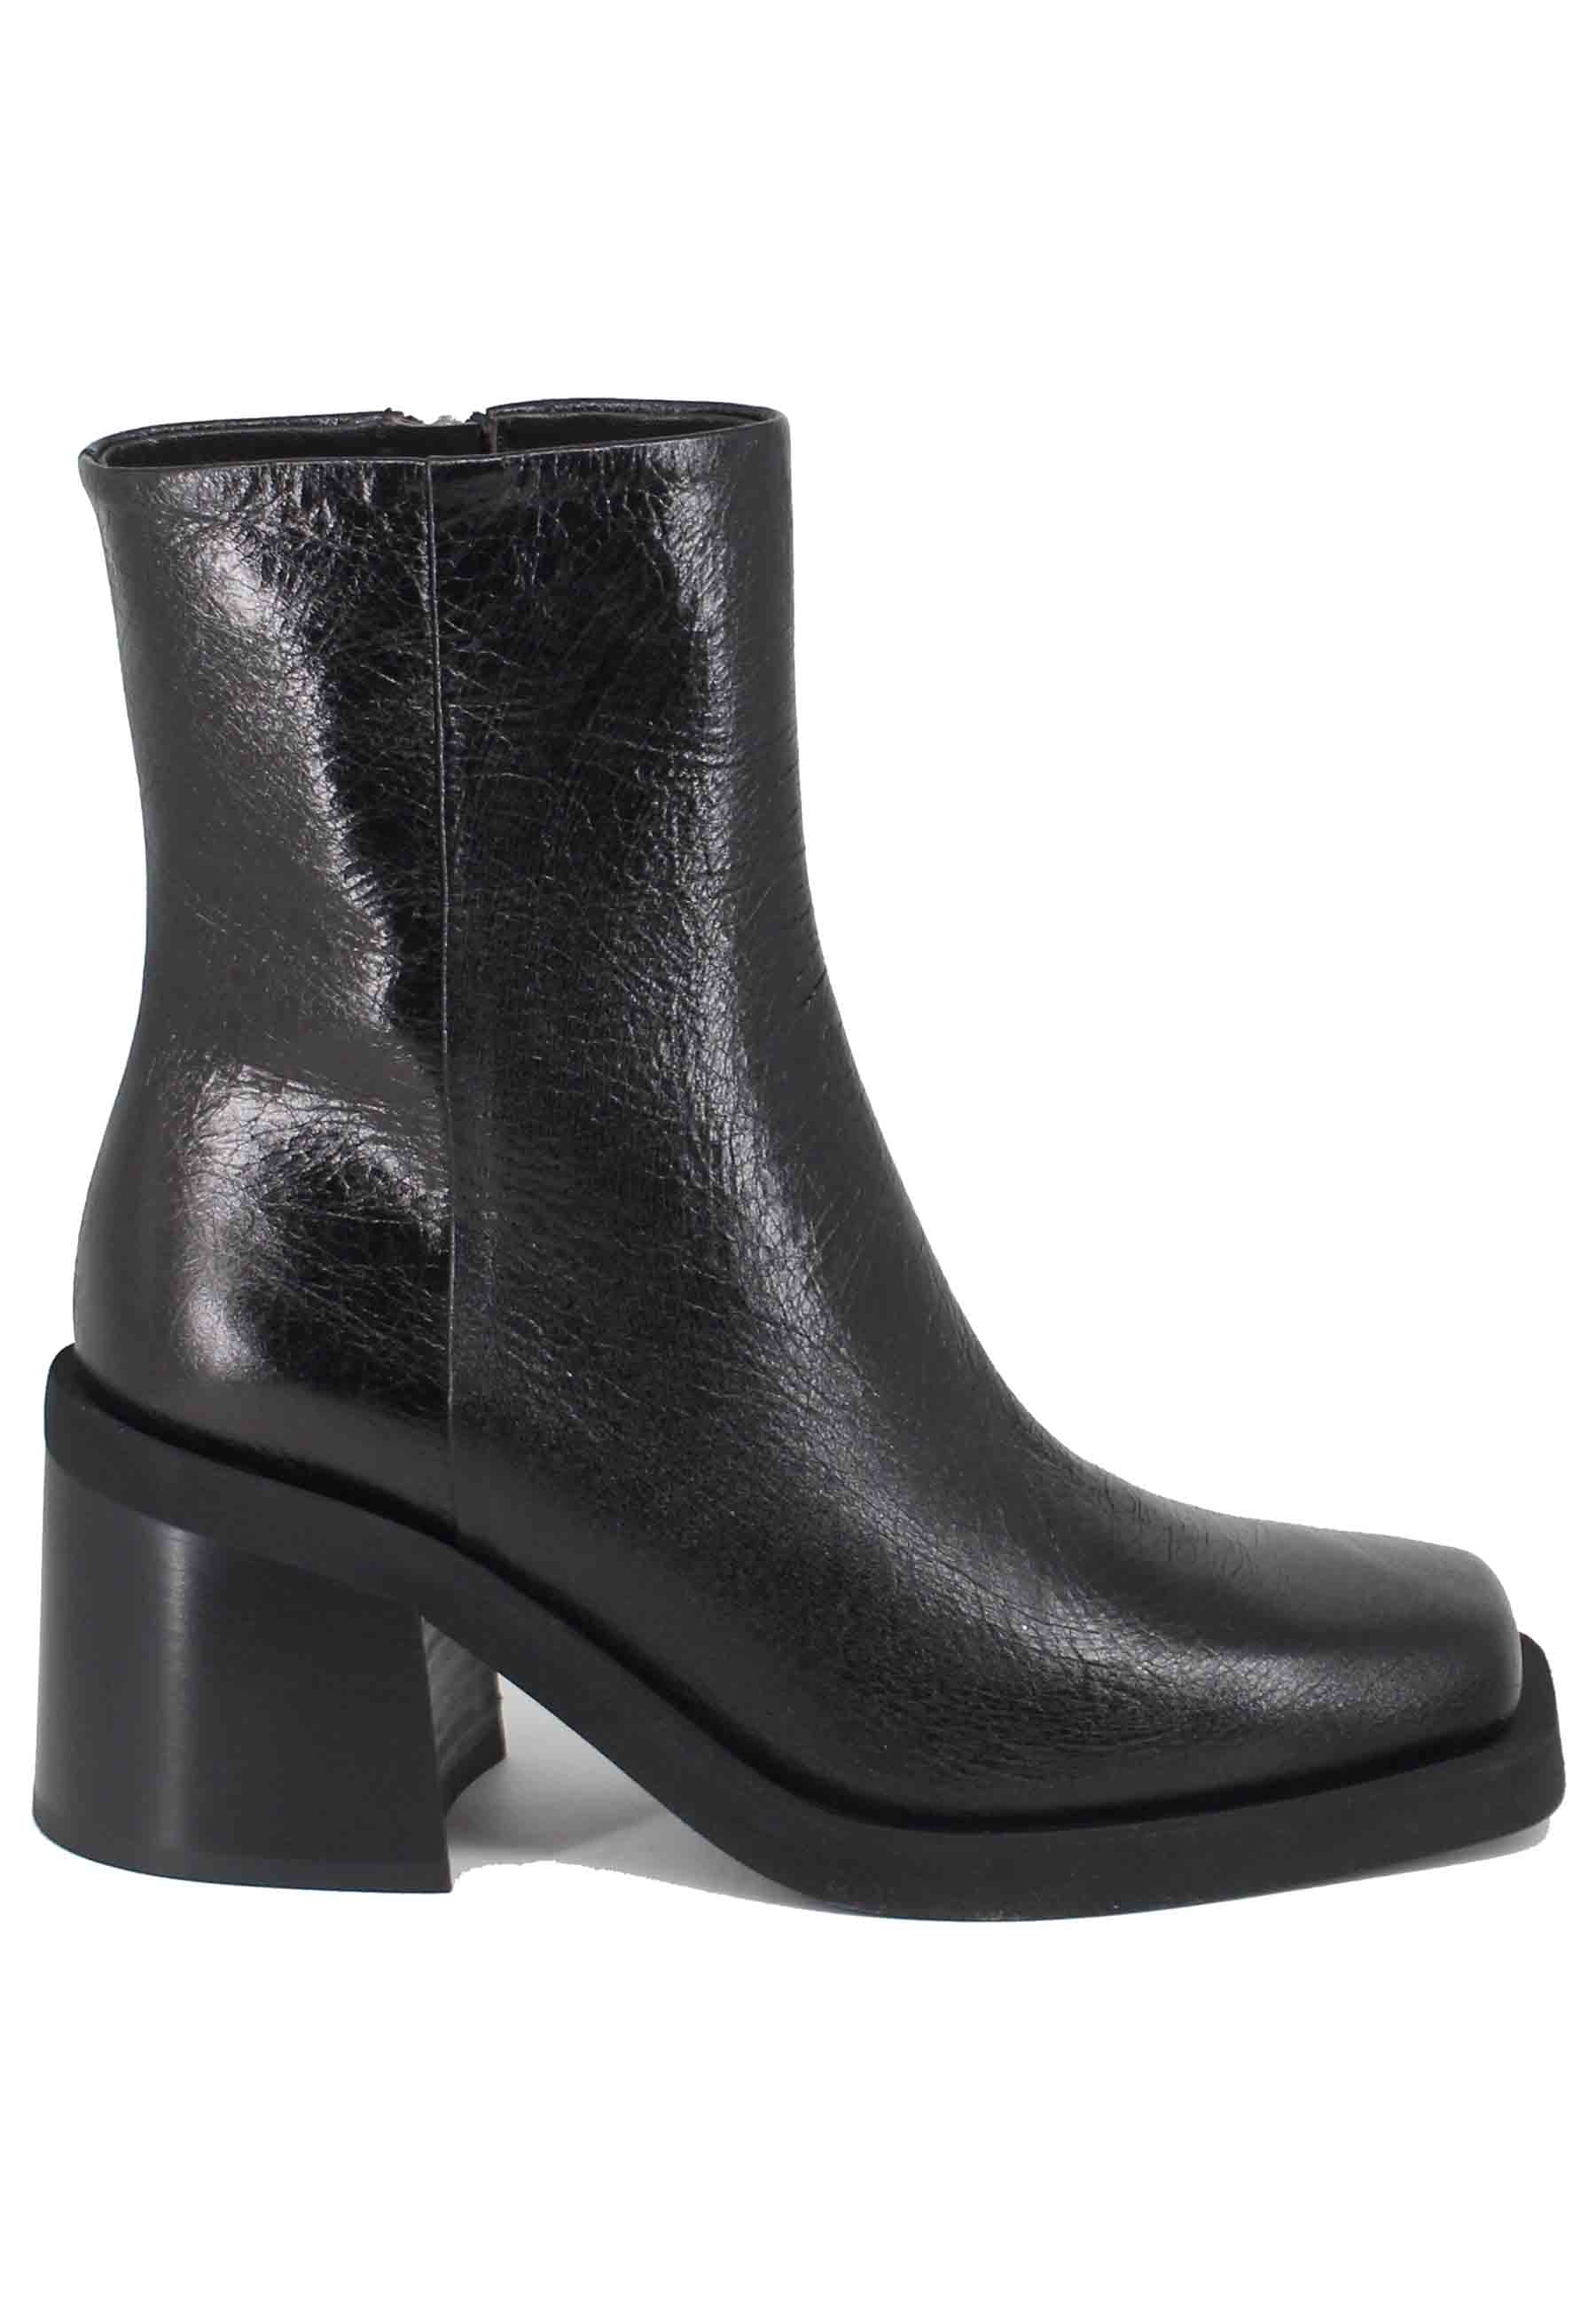 Women's ankle boots in black shiny leather with square toe